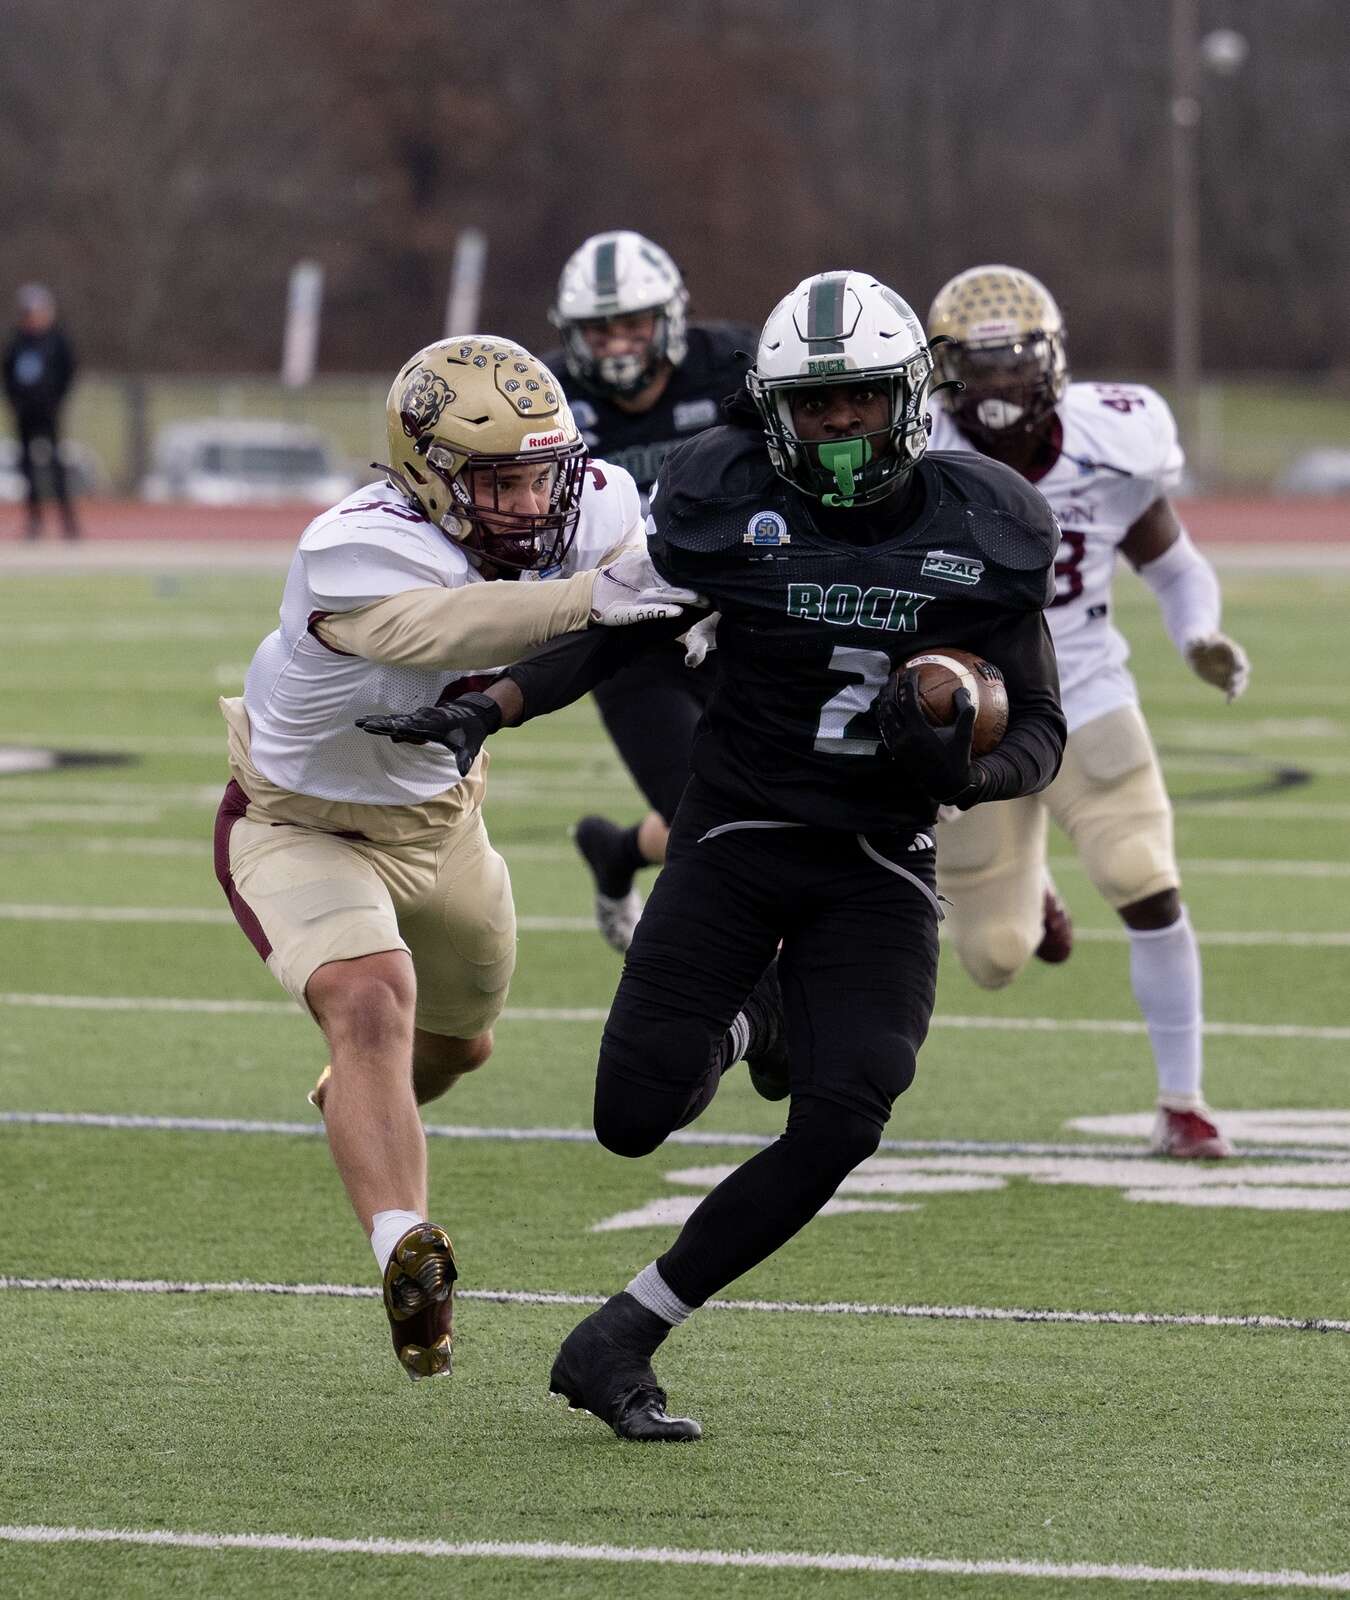 SRU's Khalid Dorsey (2) looks for the end zone